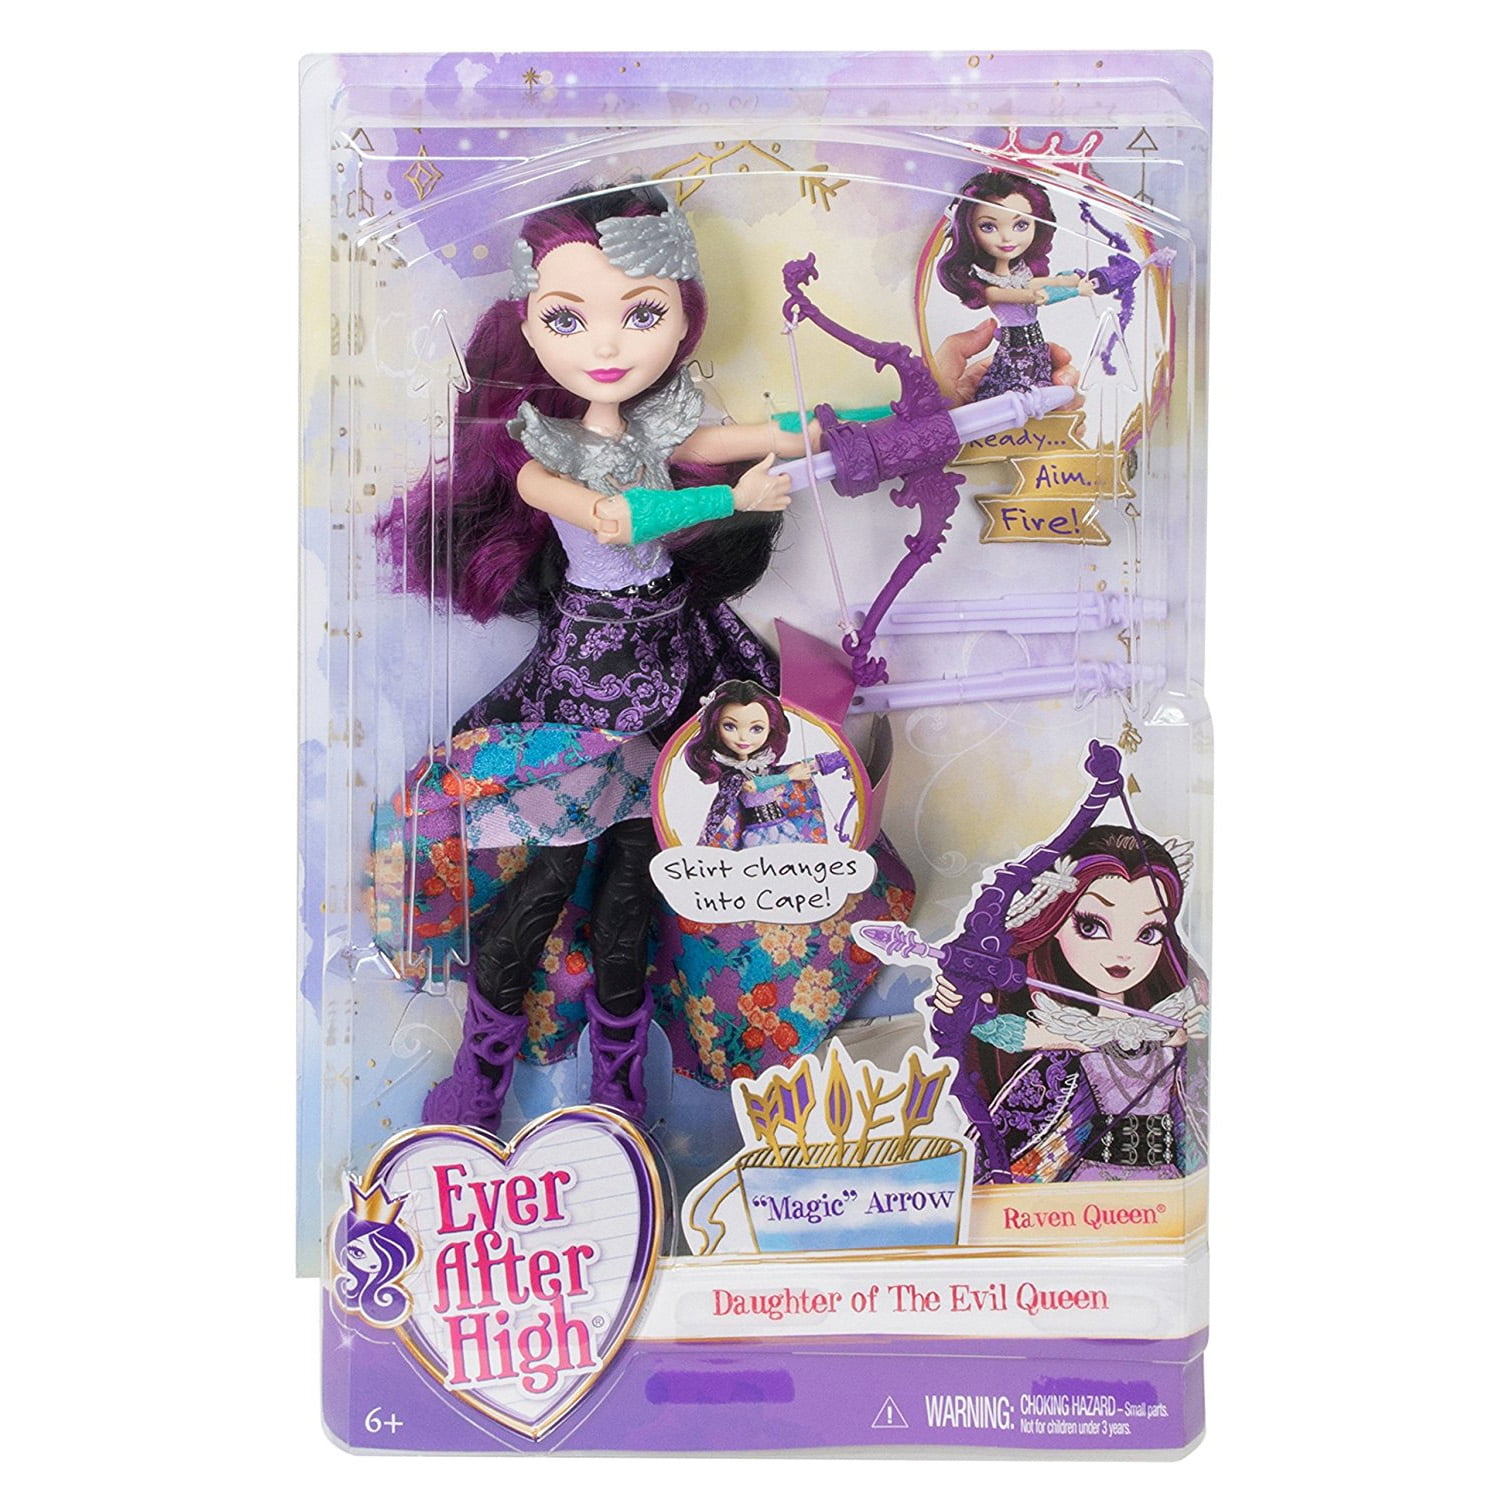 Review – Raven Queen  always ever after high